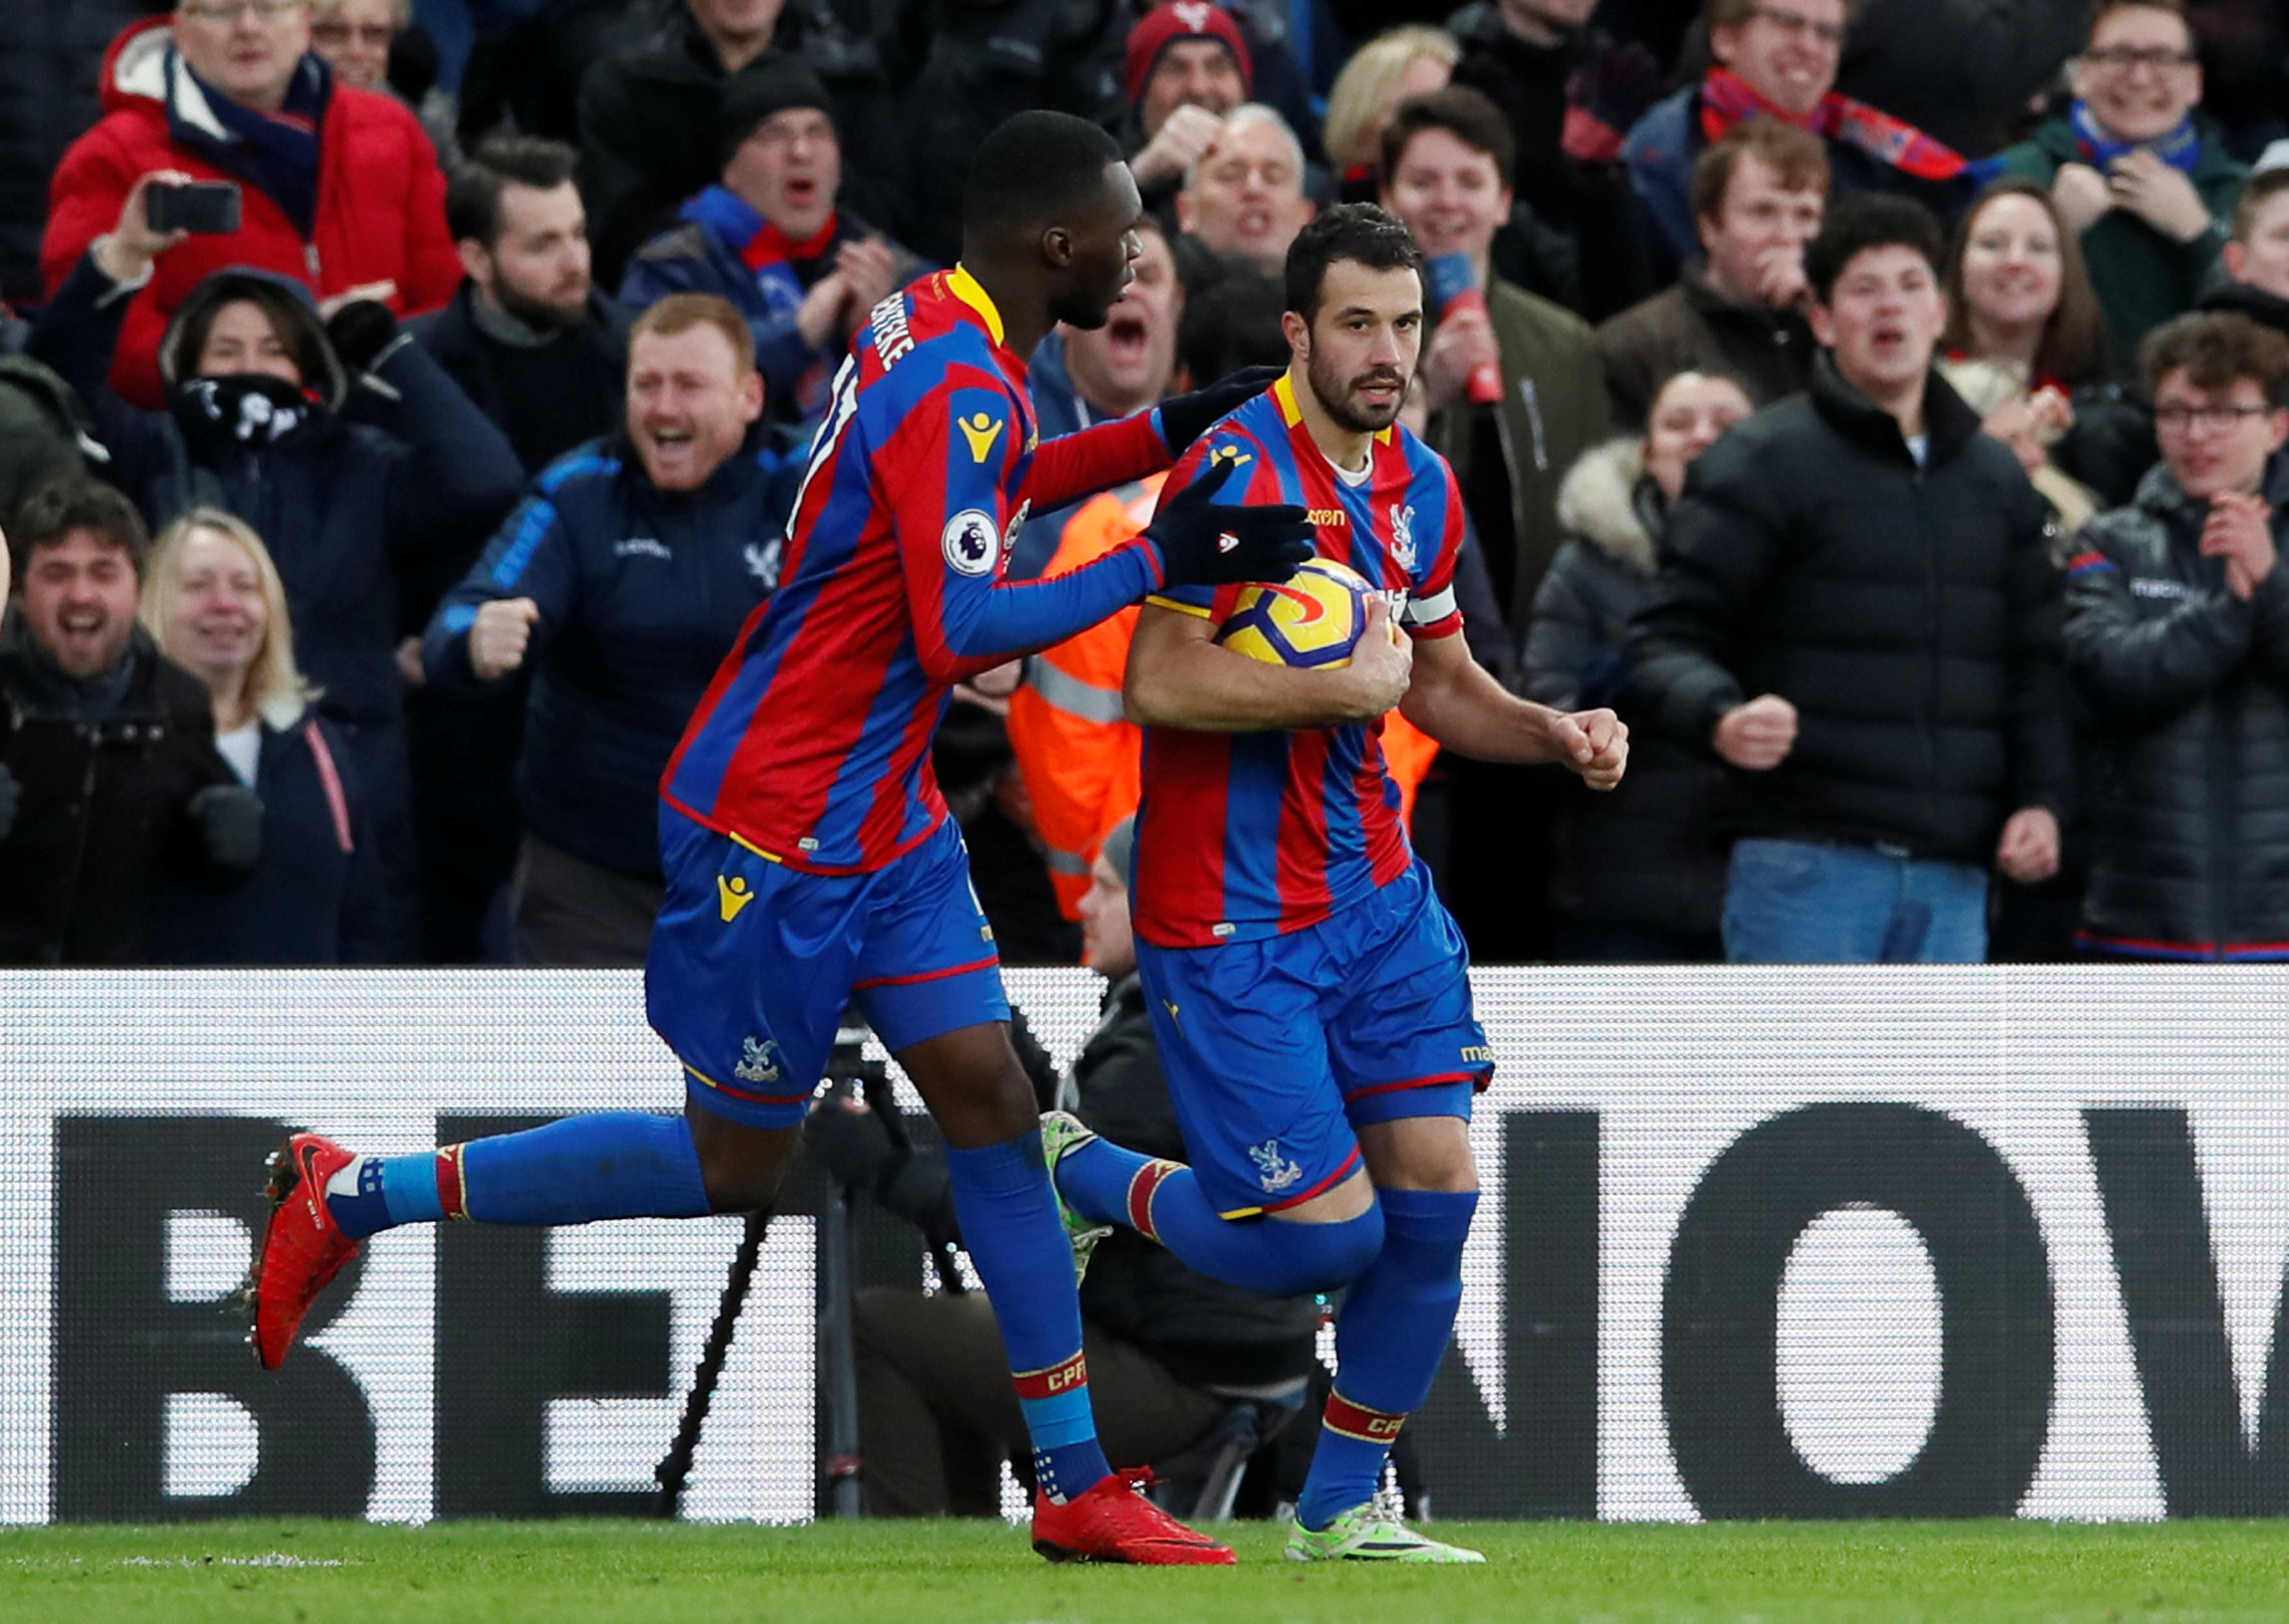 Football: Palace fight back to draw with Newcastle